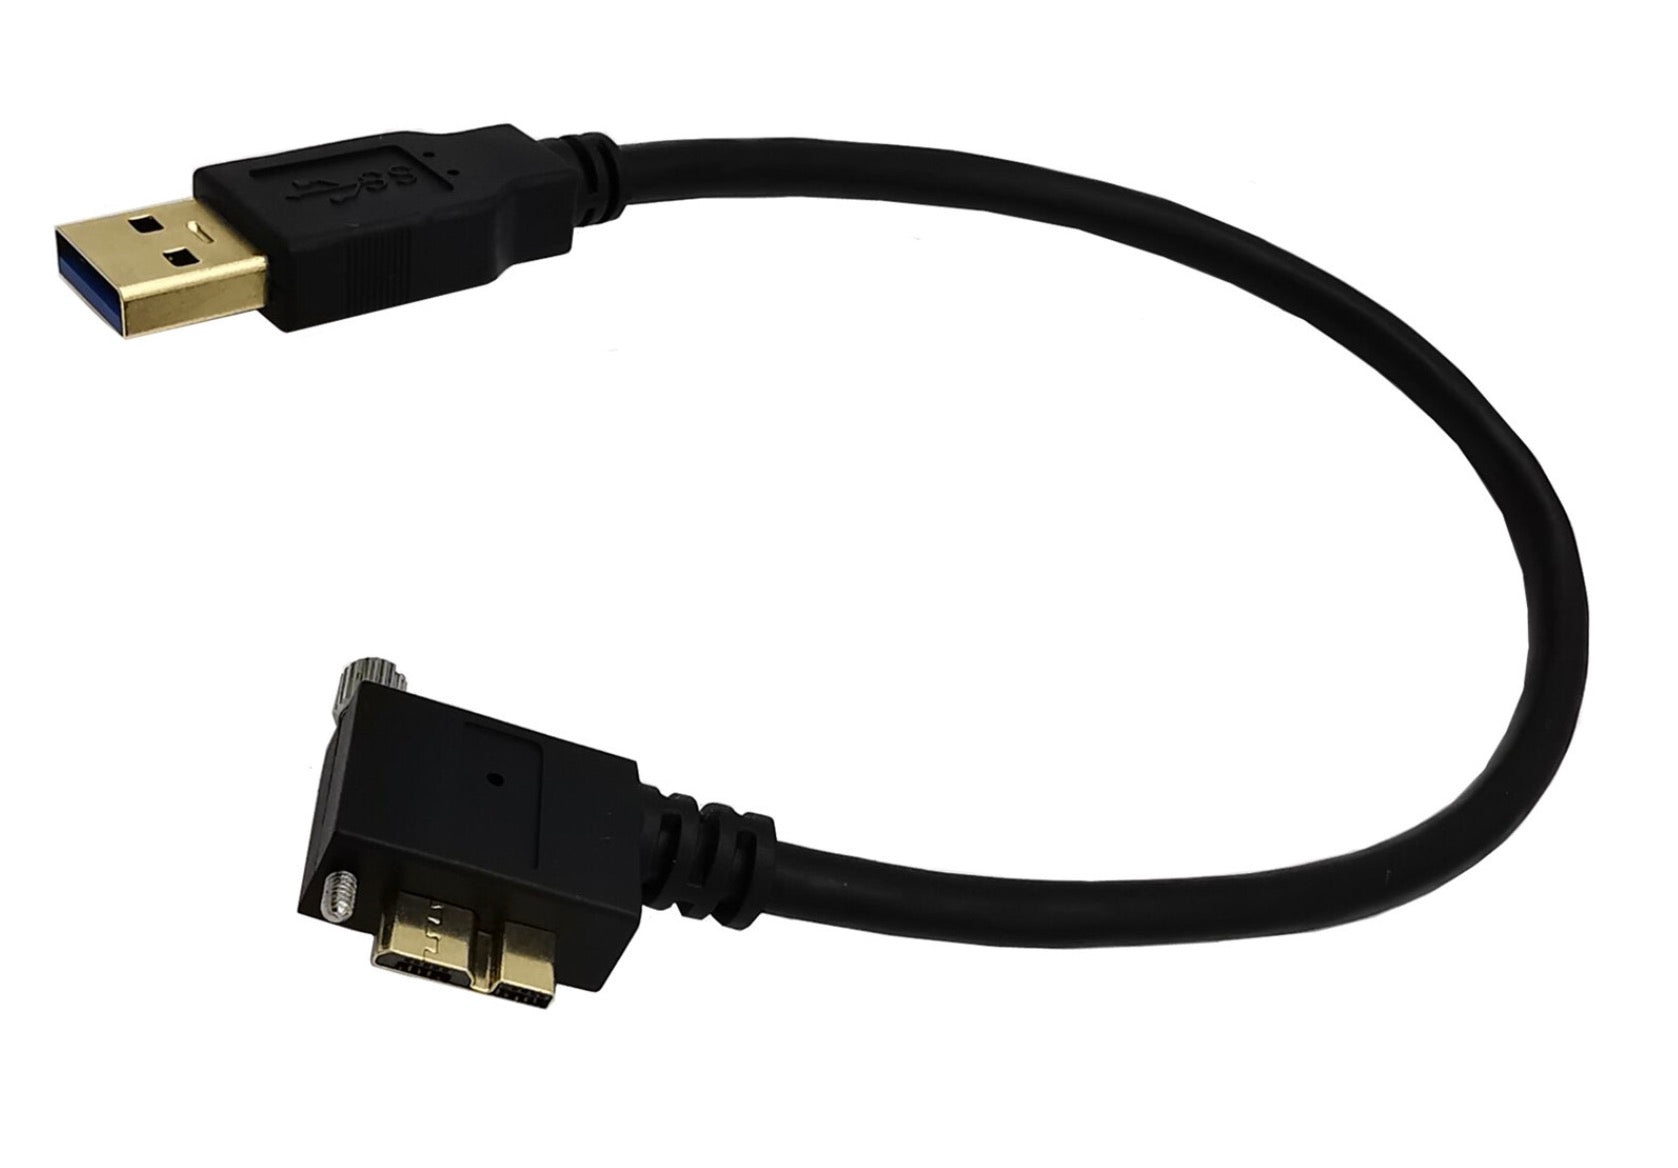 USB-A 3.0 Male to Micro-B Charge & Sync Cable with Screws (Right Angle)